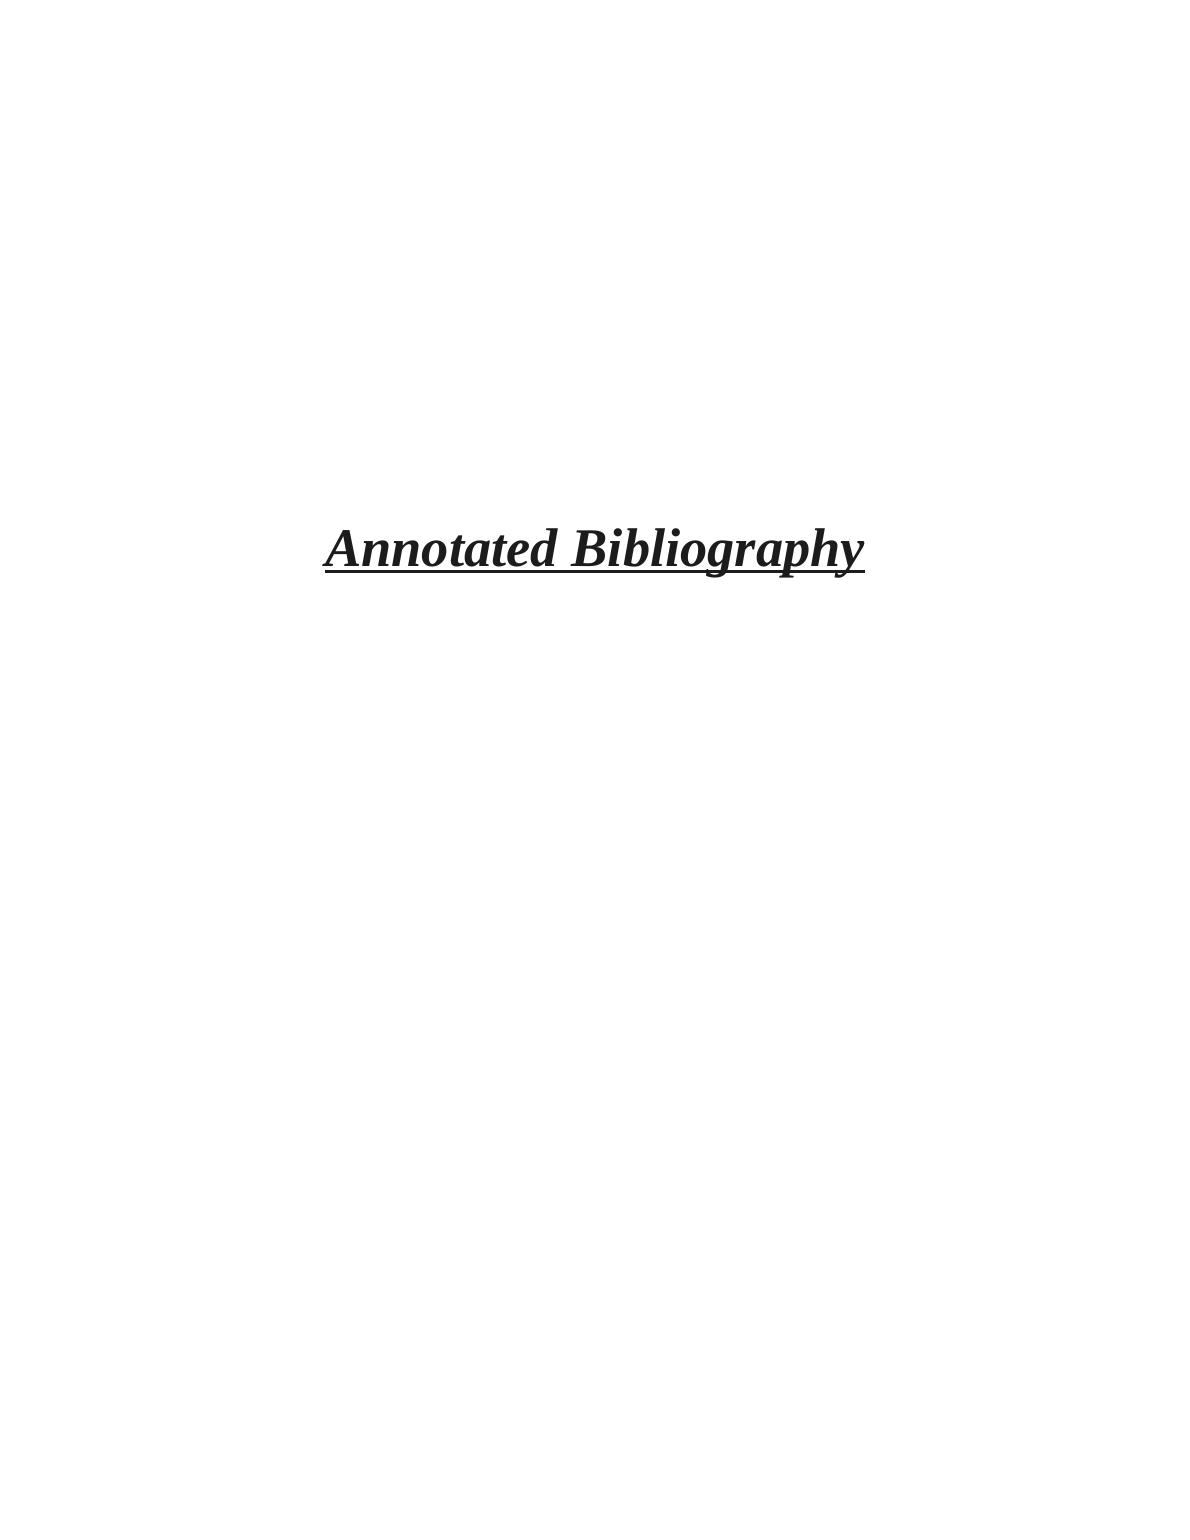 Annotated Bibliography Assignment PDF_1